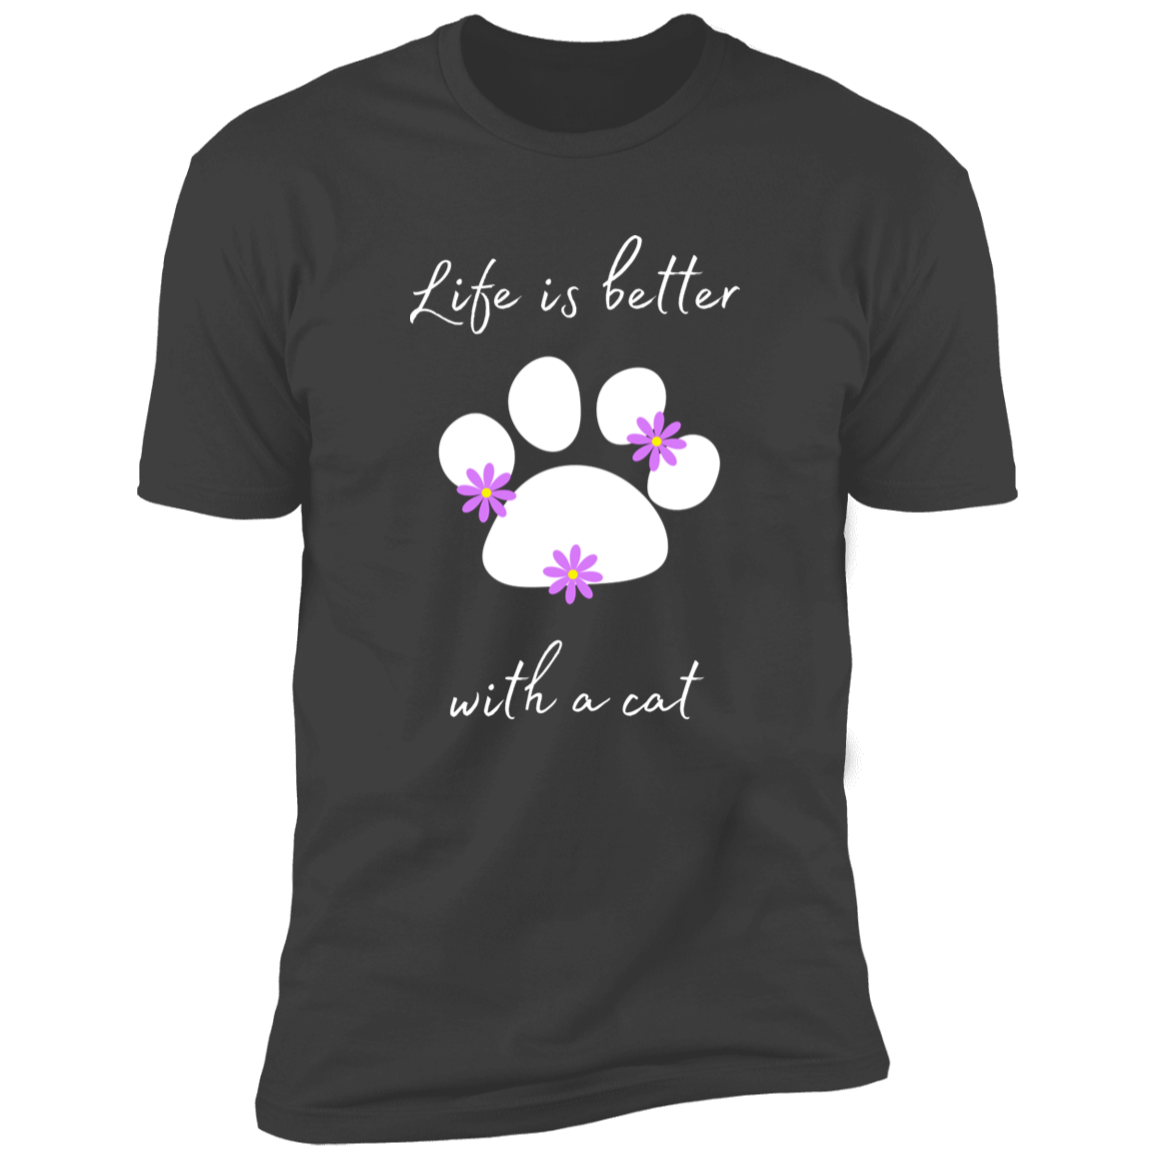 Life is Better with a Cat (Flower) cat t-shirt, cat shirt for humans, cat themed t-shirt, in heavy metal gray